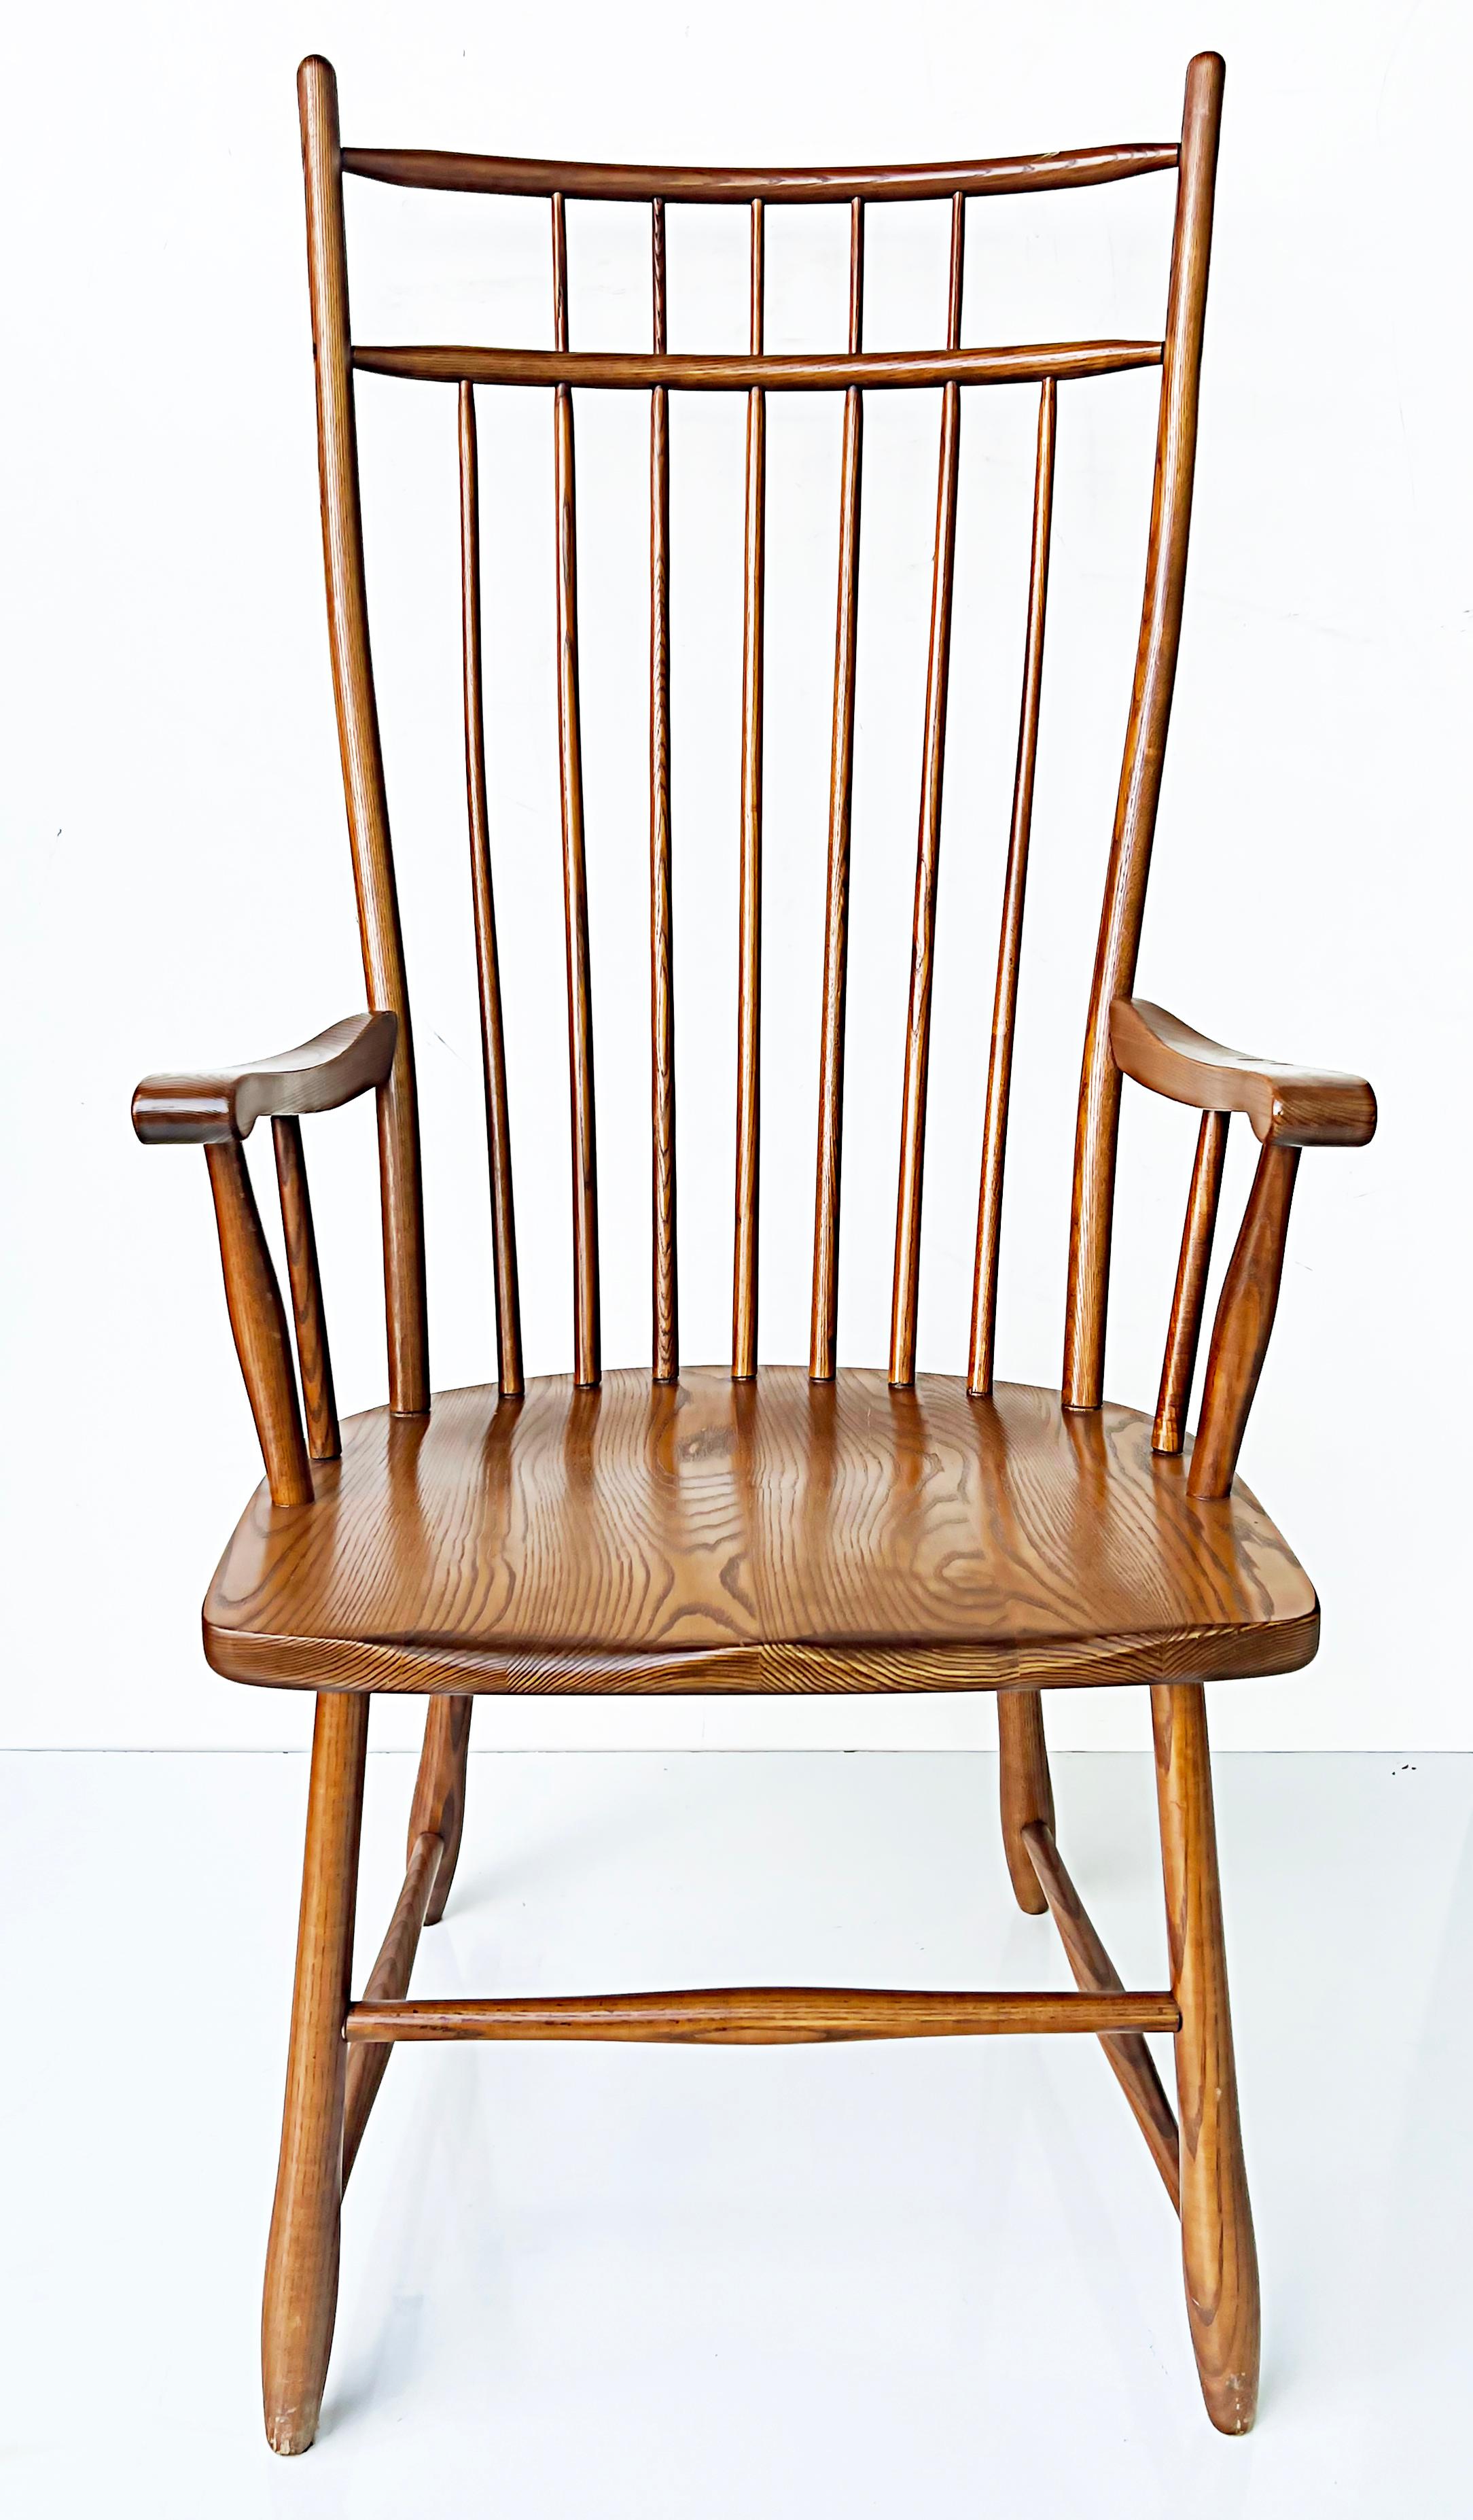 S Bent Bros. Vintage Modern Colonial Revival chairs, Set of 6 circa 1960s

Offered for sale is an exceptional set of 6 vintage Modern Colonial Windsor dining chairs made by S Bent & Brothers circa the 1960s. The chairs are maple and ash and are in